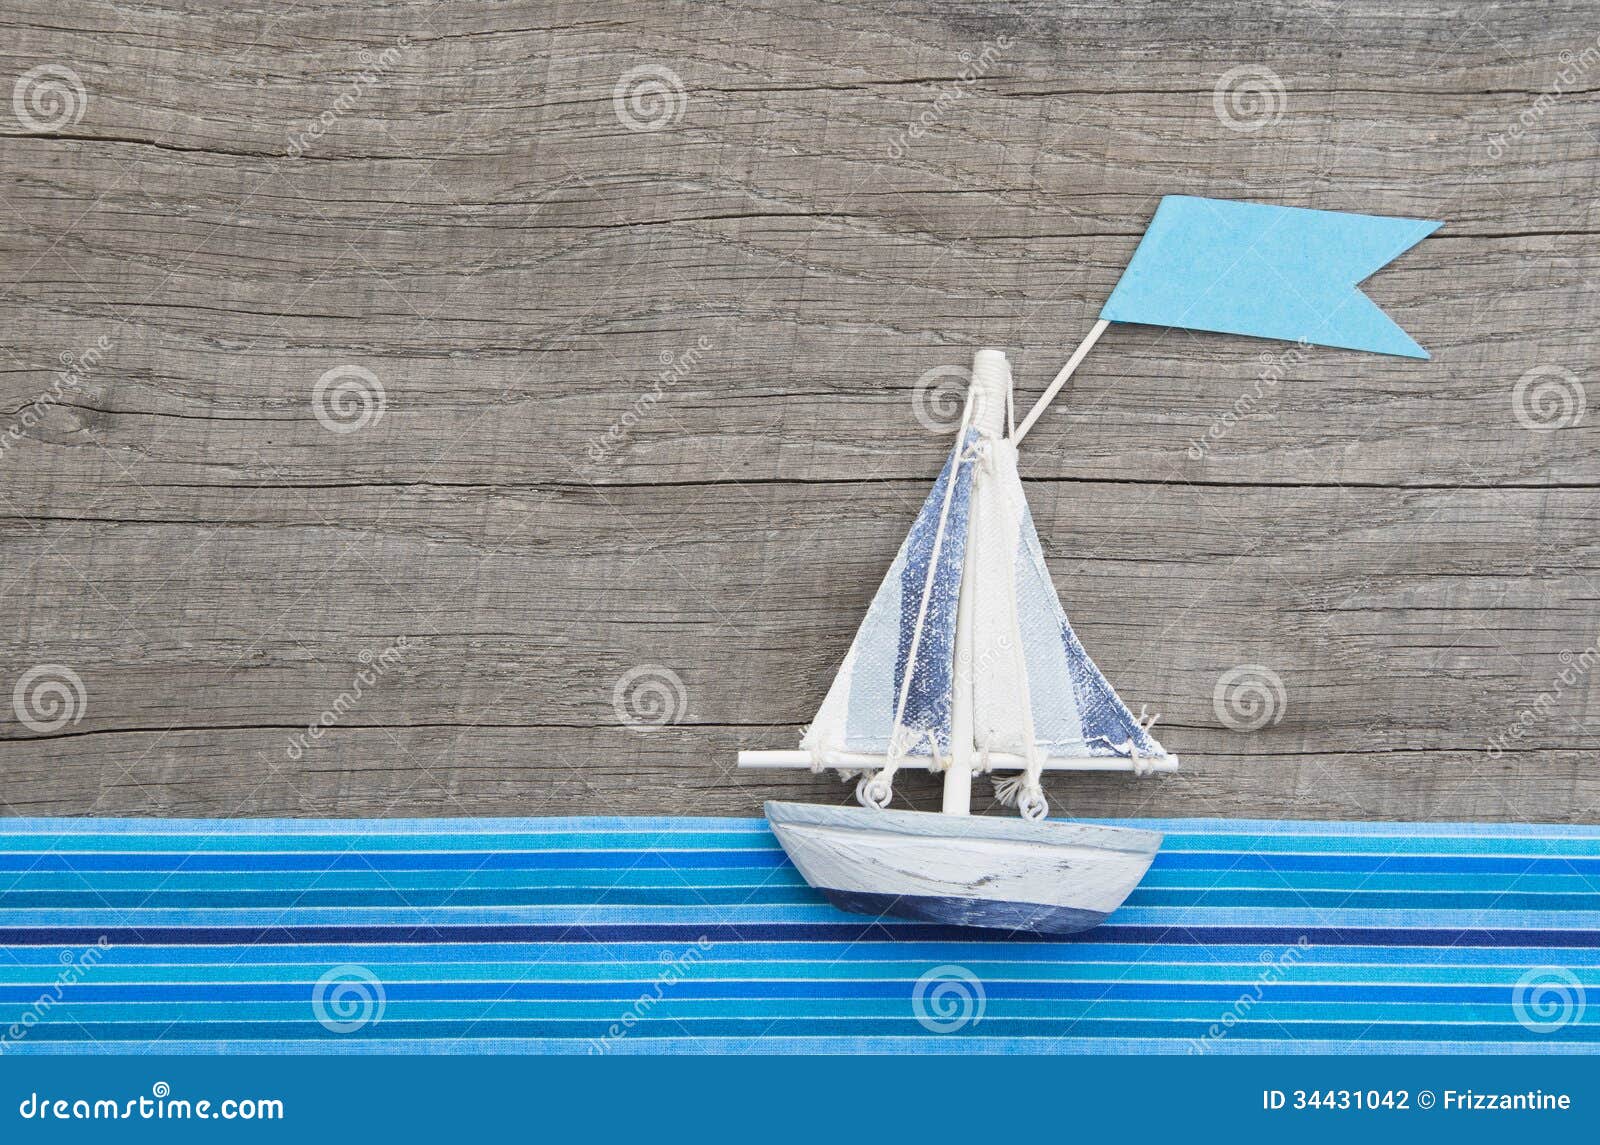 Sailboat With Flag On Grey Wooden Background With Blue 